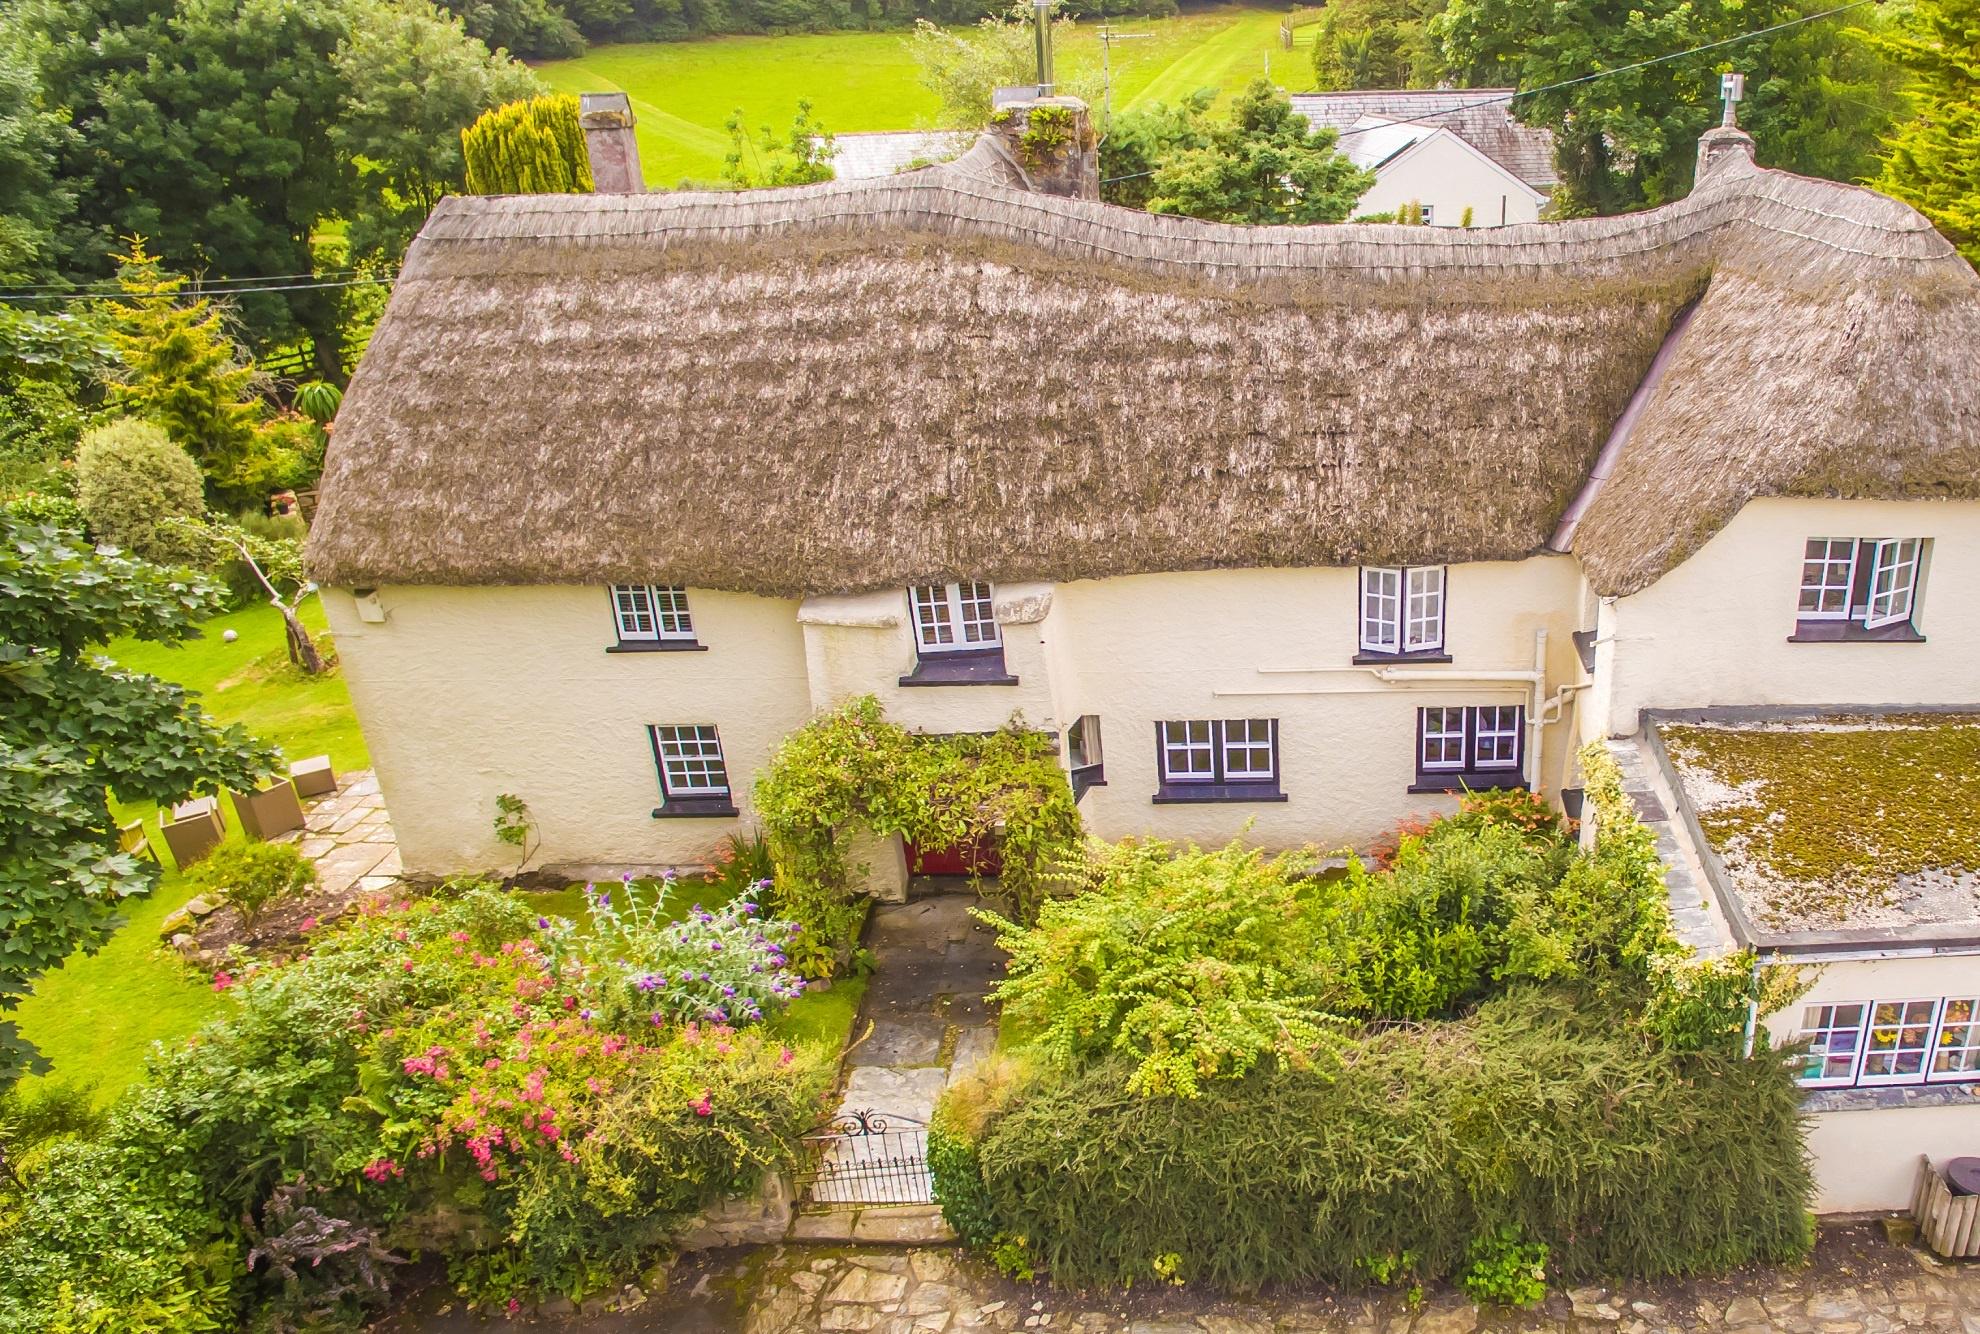 Family-friendly holiday cottages - best UK cottages for families I Cool Places